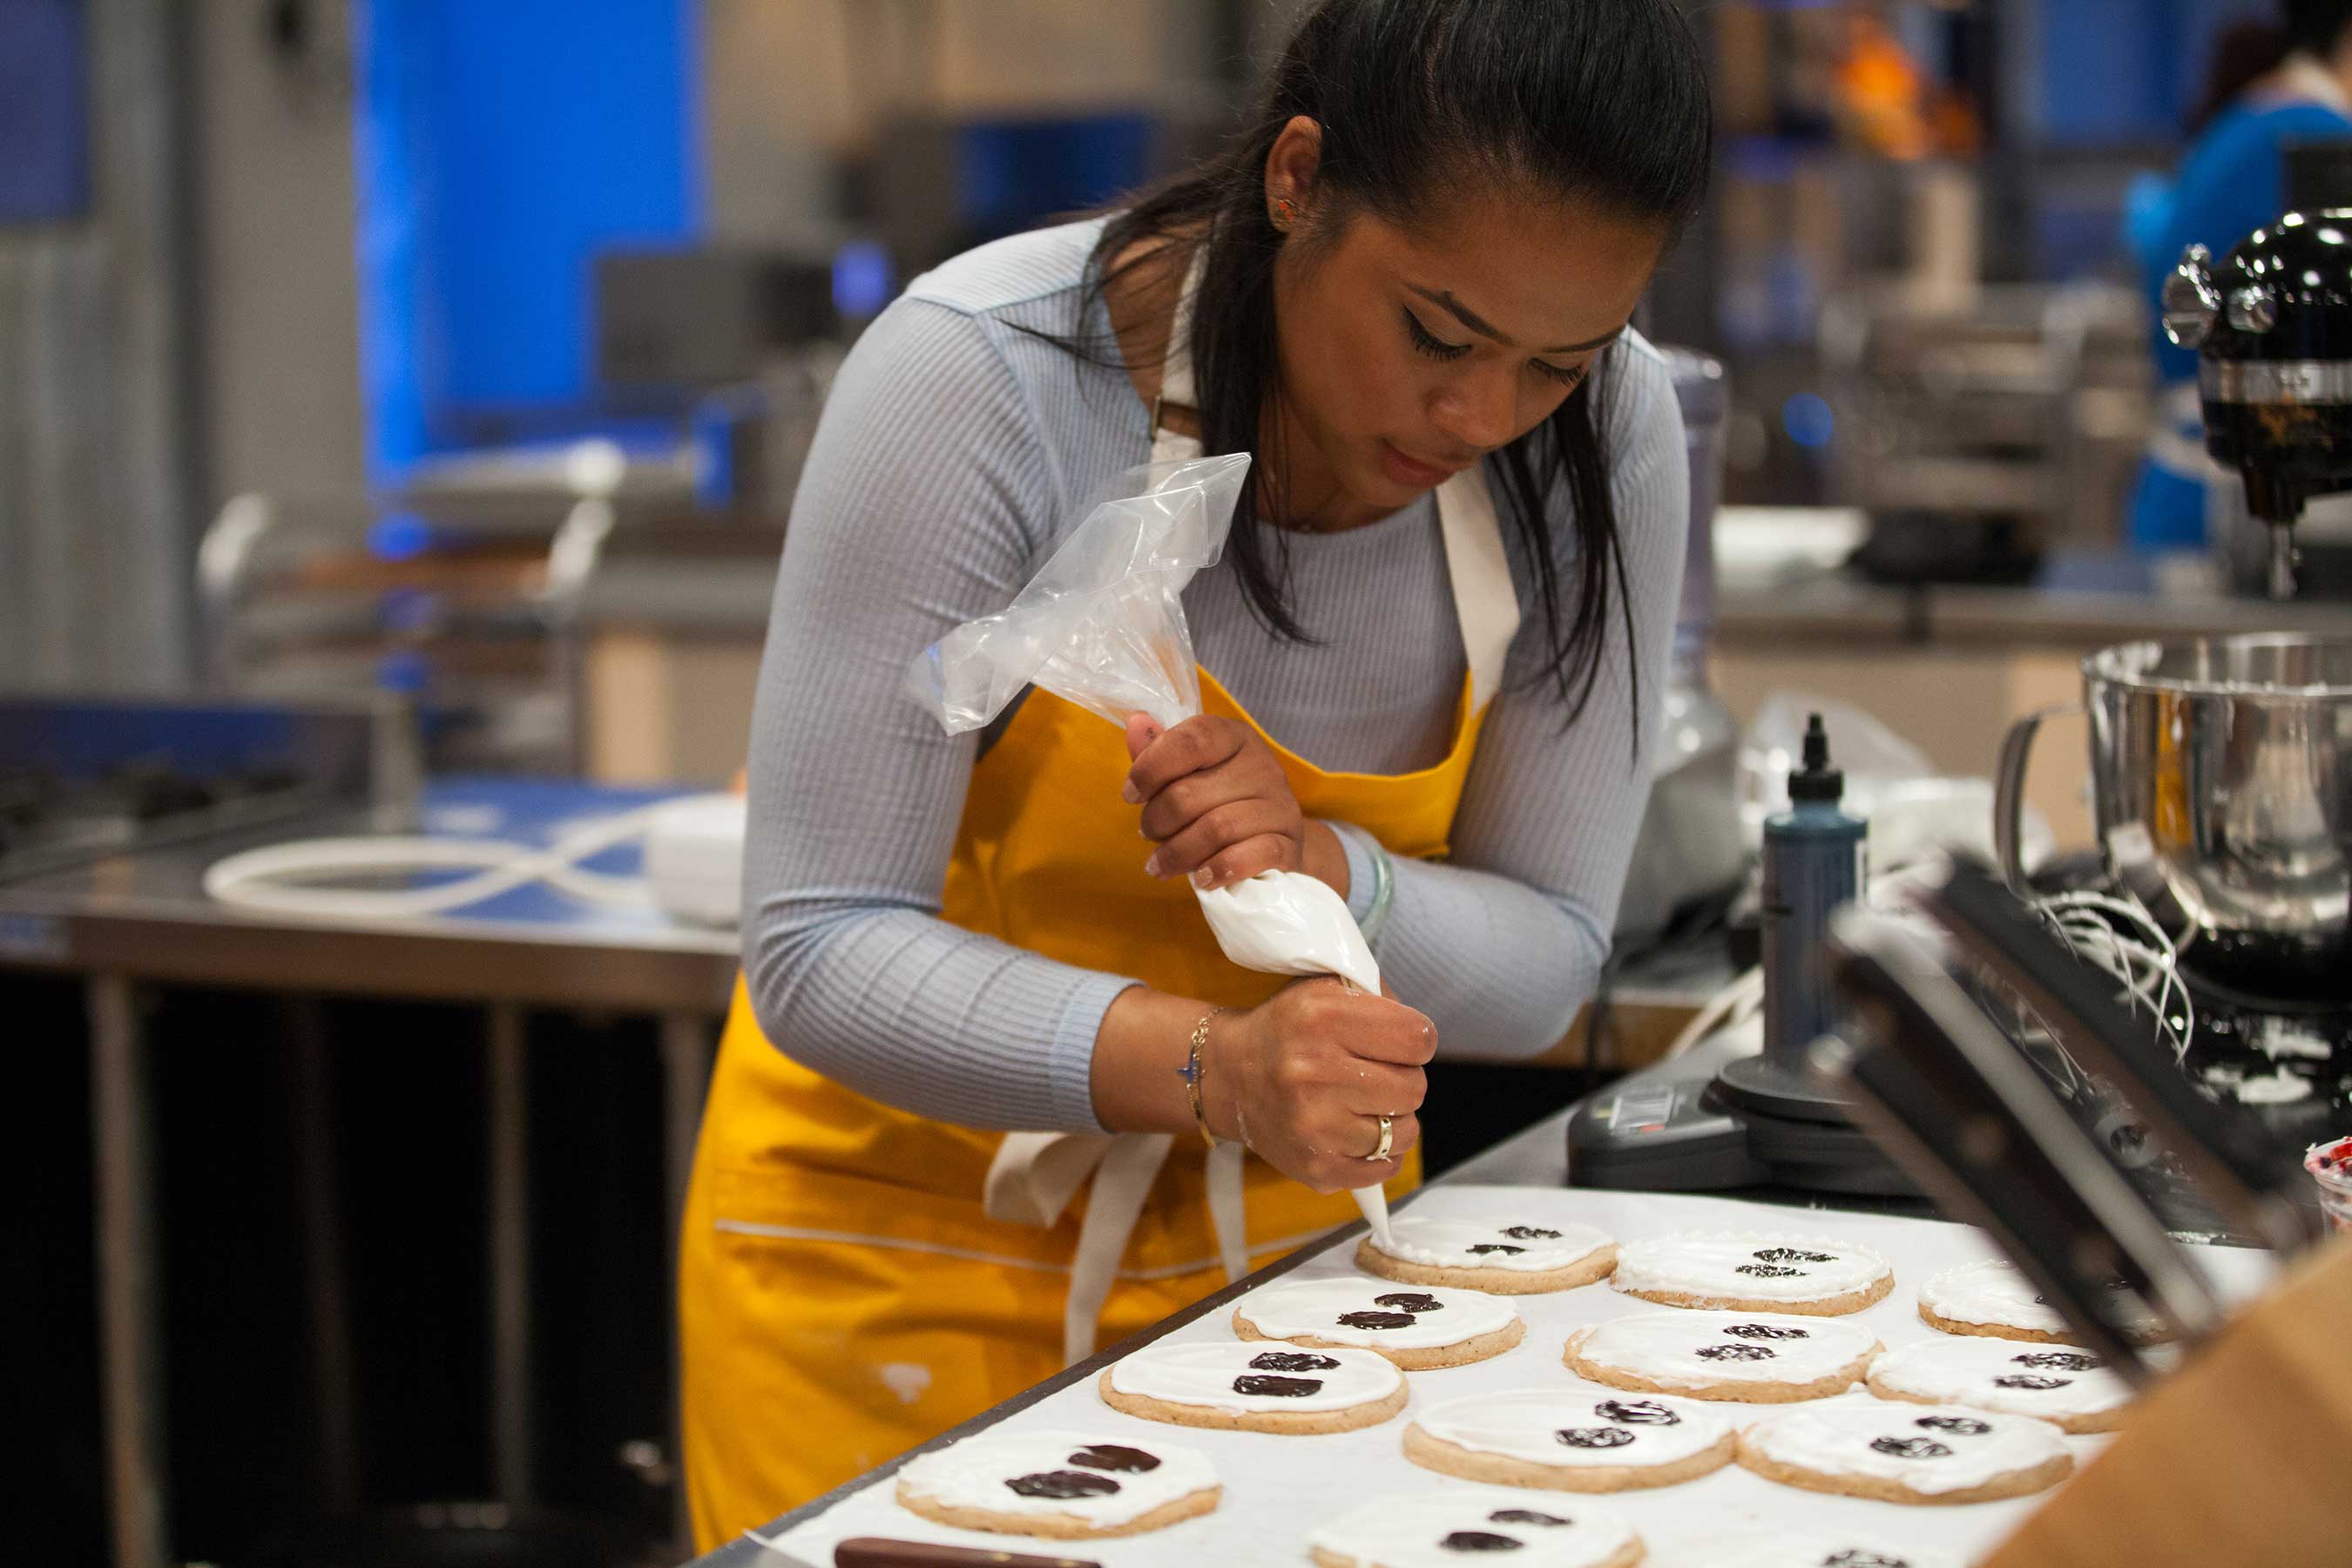 Baker Jasmin Bell rushes to finish decorating Halloween cookies on Food Network's Halloween Baking Championship